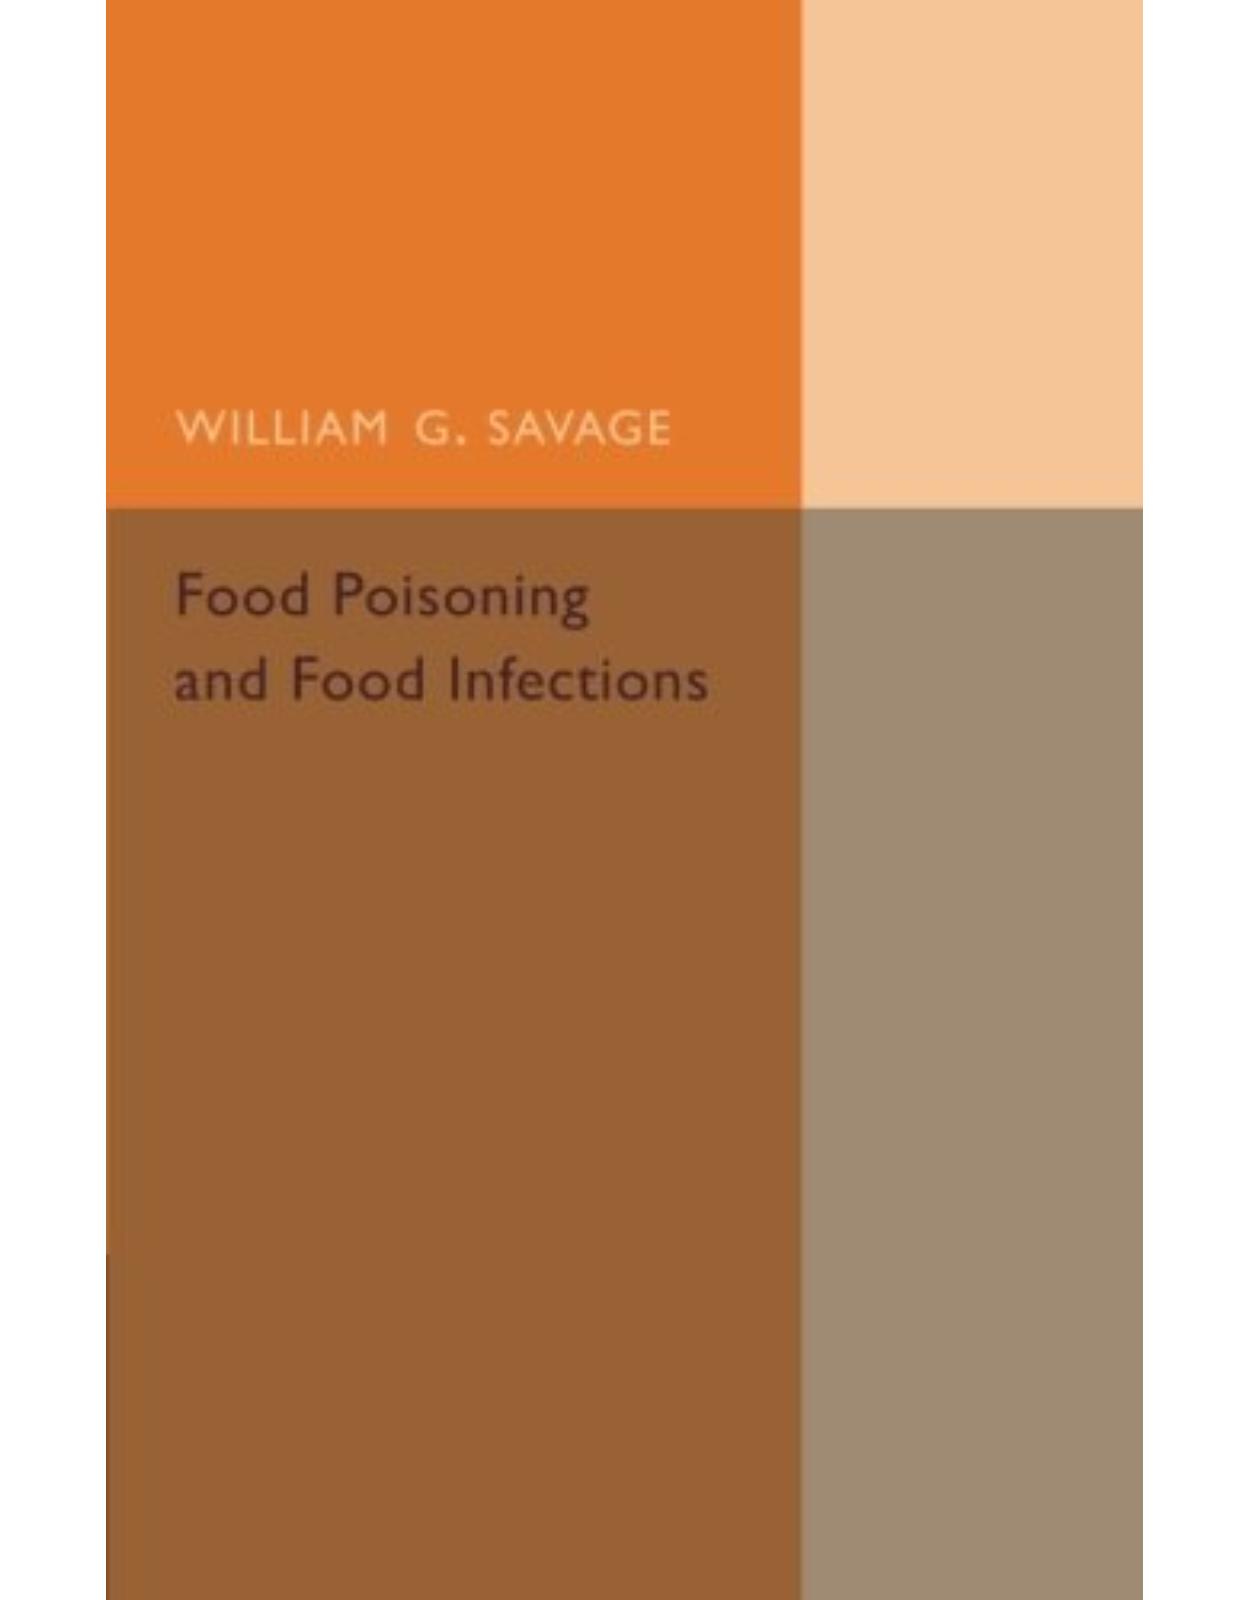 Food Poisoning and Food Infections (Cambridge Public Health)